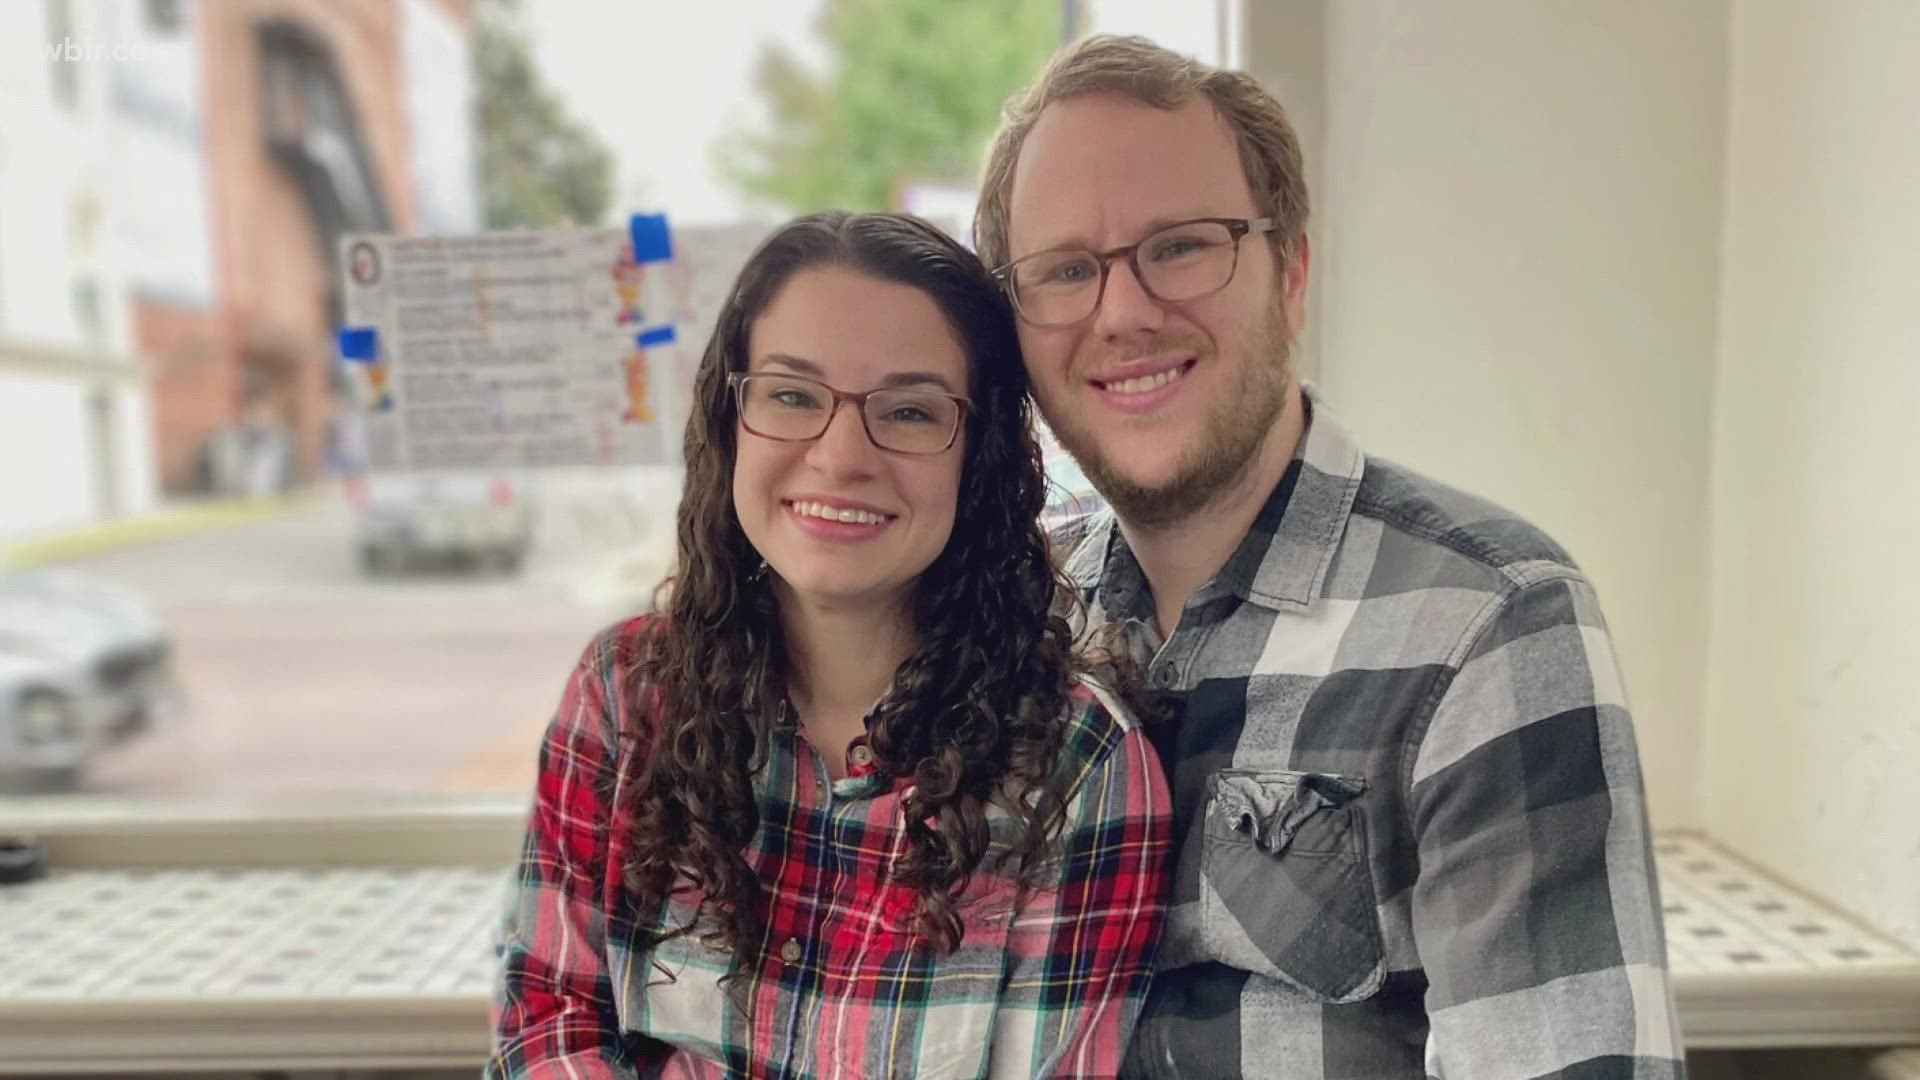 The couple said Tennessee is violating the state constitution by allowing state funding to go to agencies that discriminate on the basis of religion.